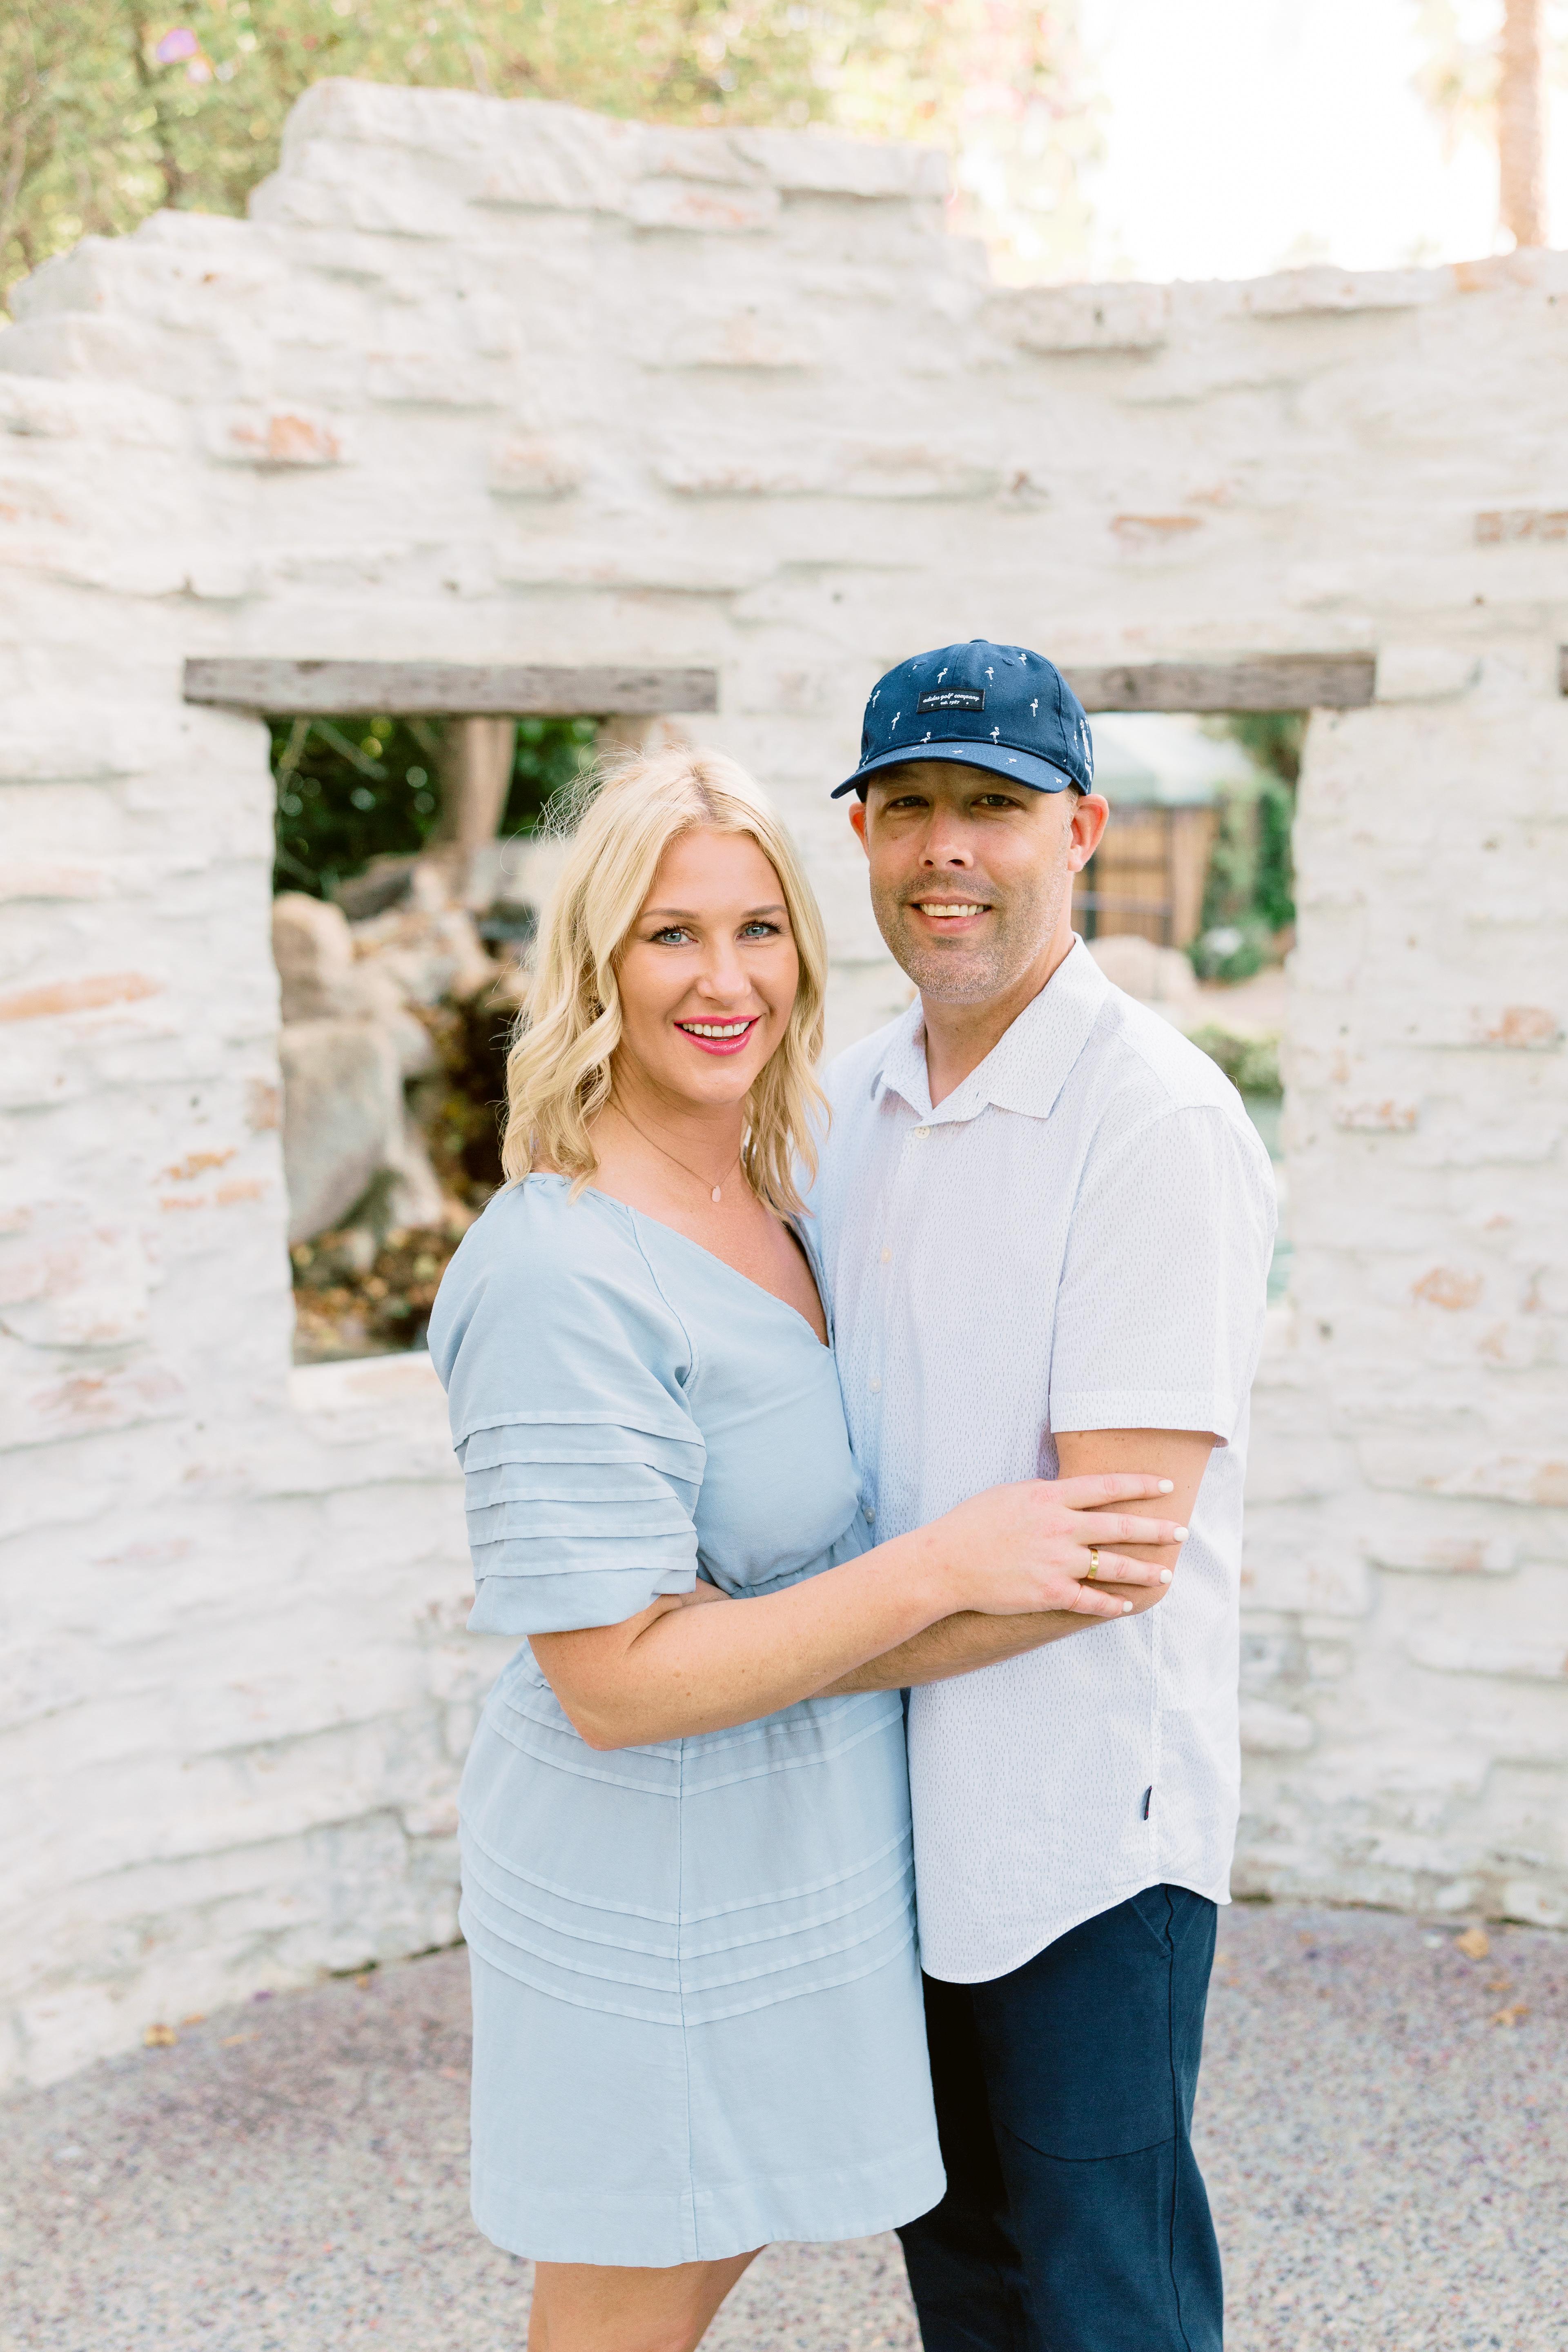 The Wedding Website of Jacquelynn Reasy and Chad Neslon